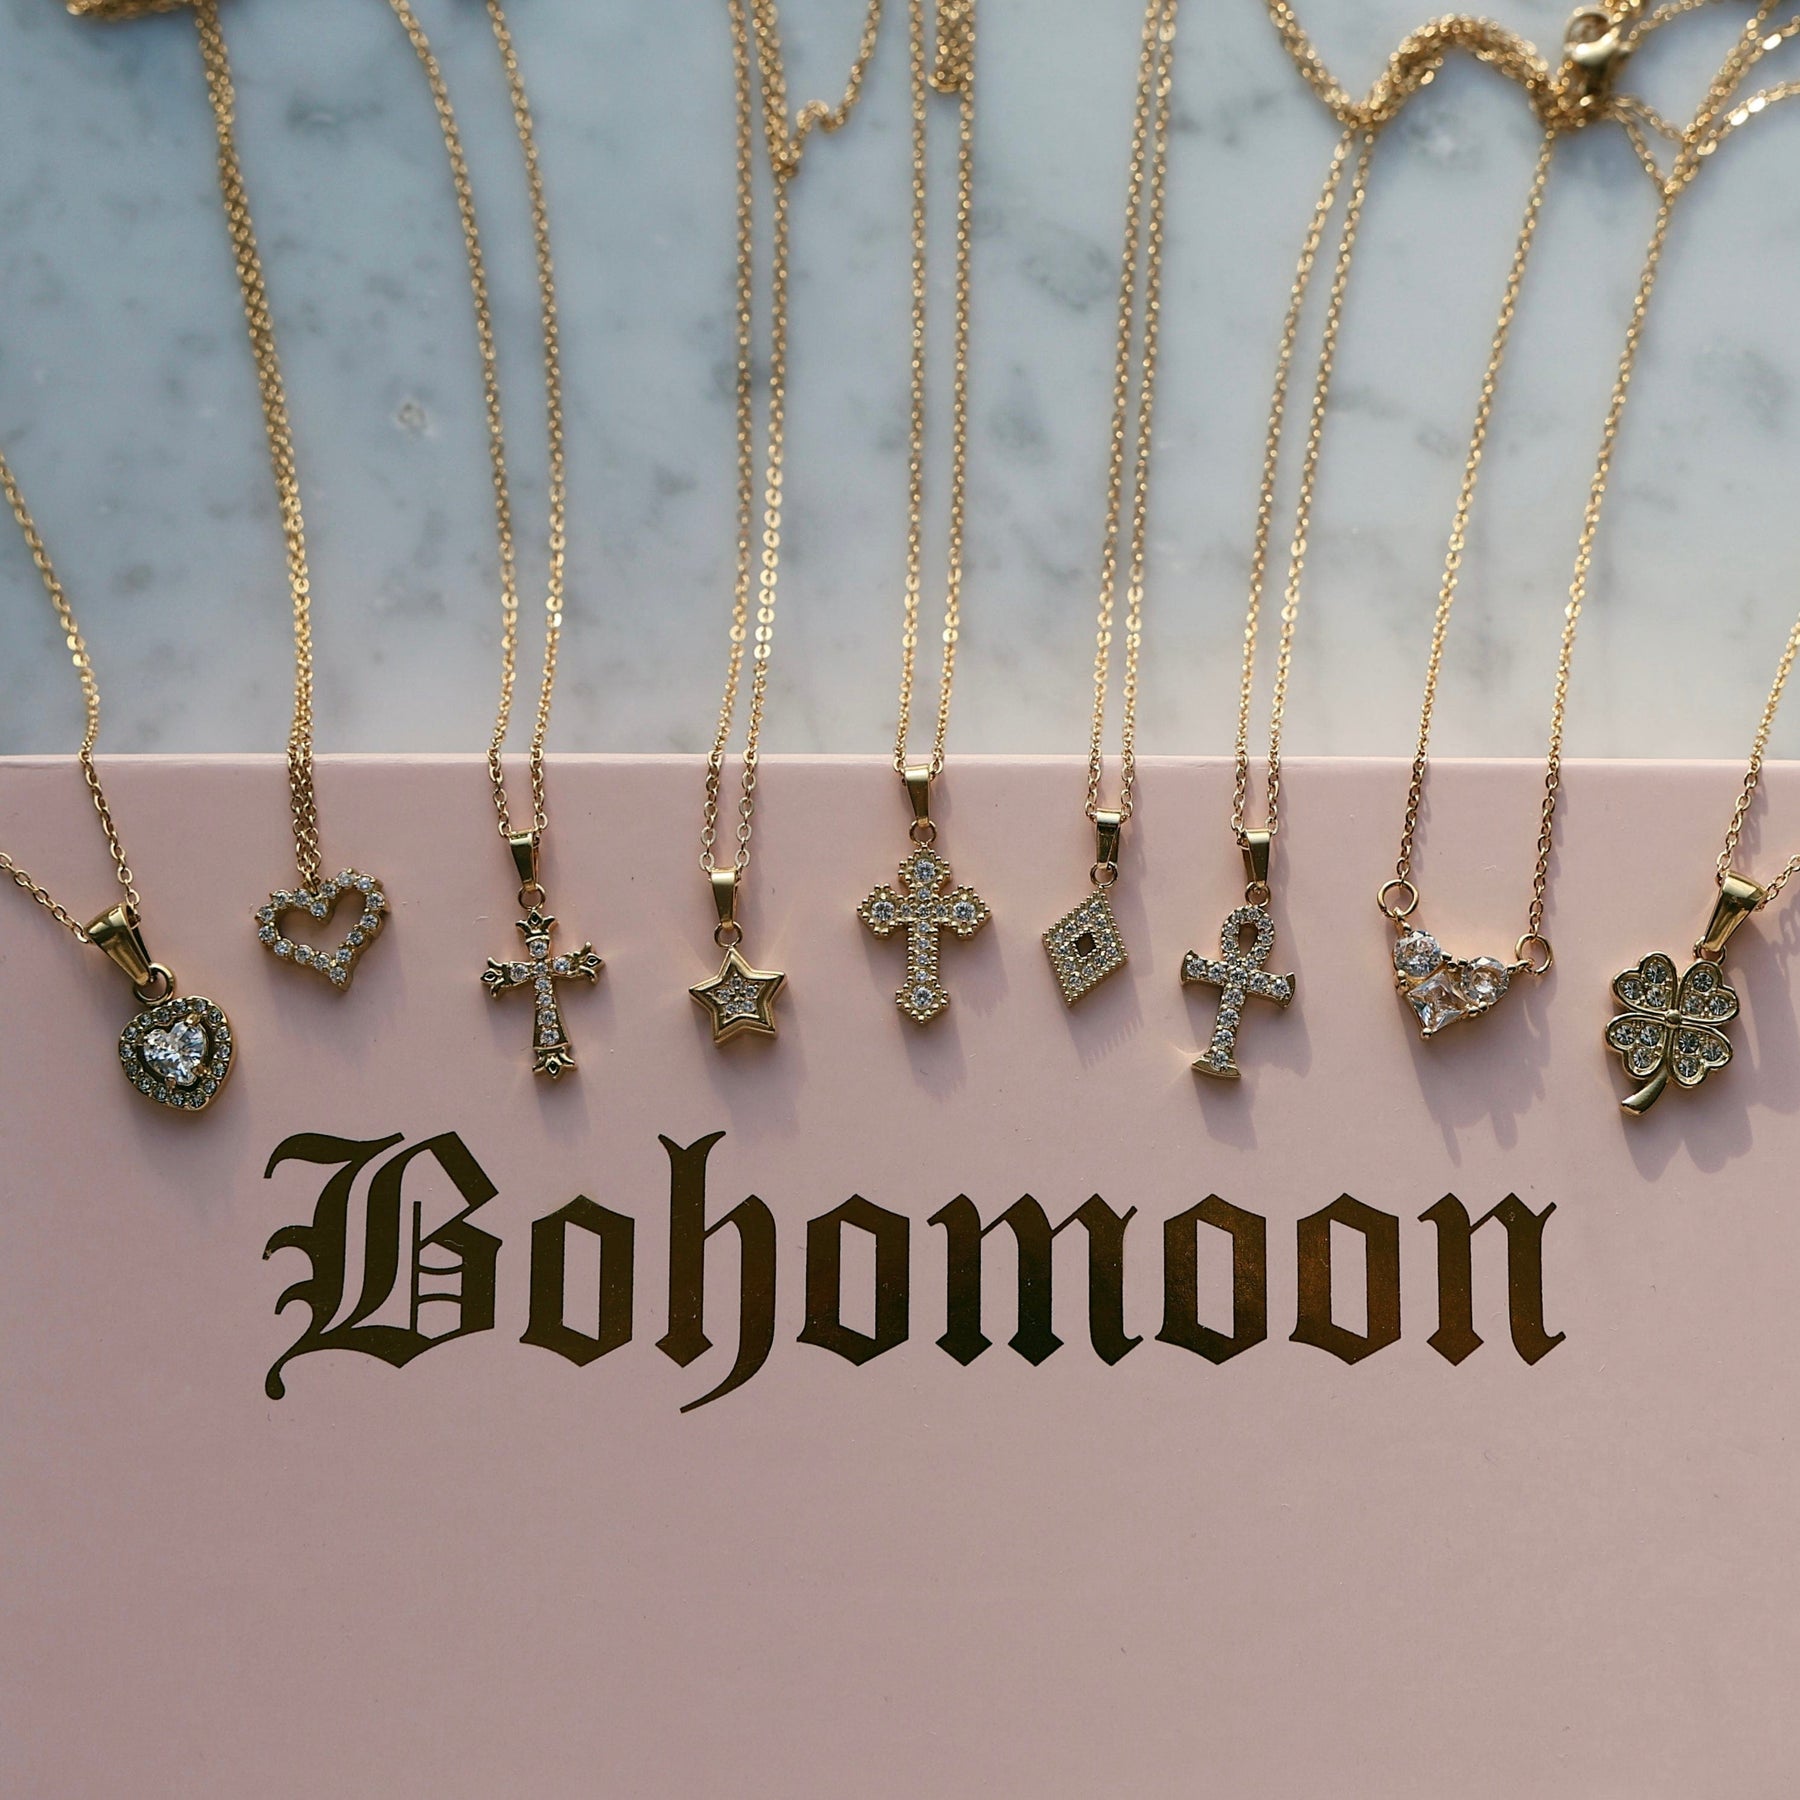 BohoMoon Stainless Steel Inspired Necklace Gold